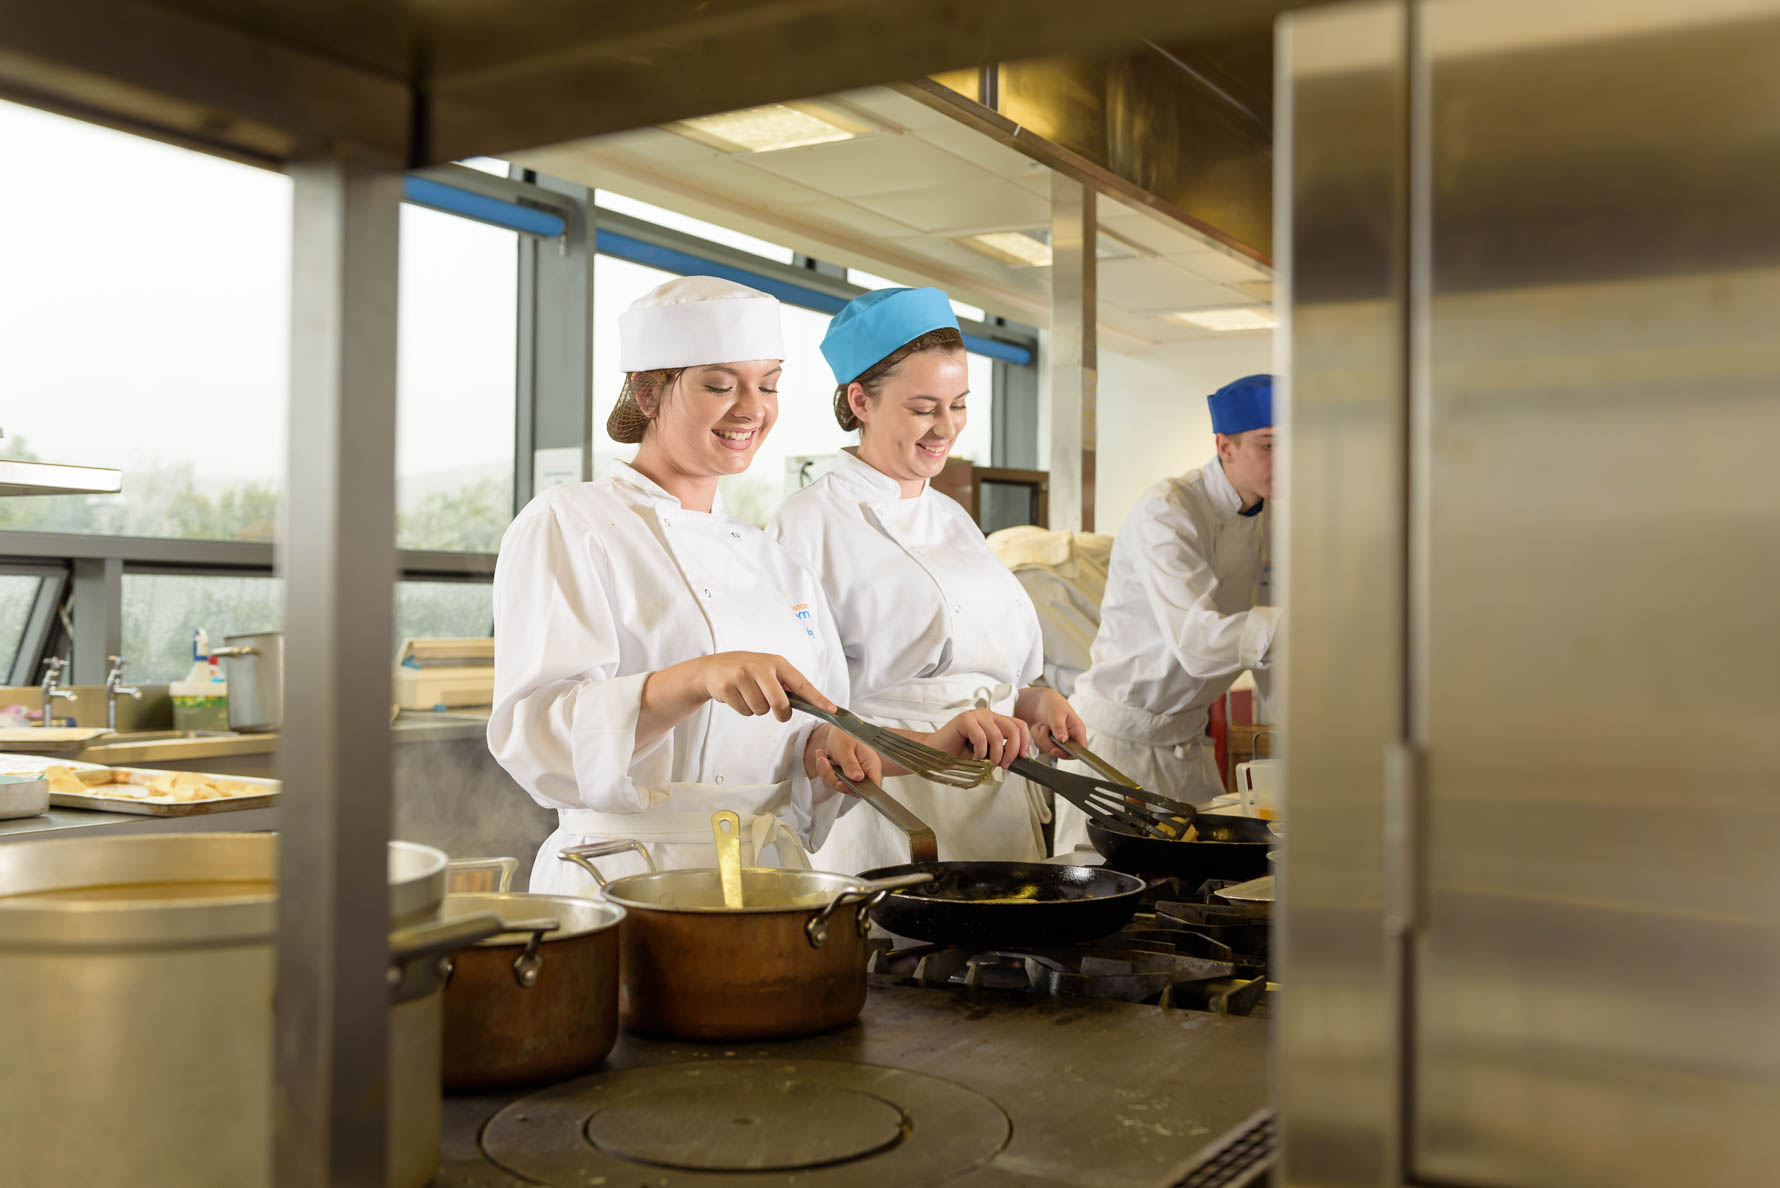 School Prospectus Photography - trainee chefs in a kitchen